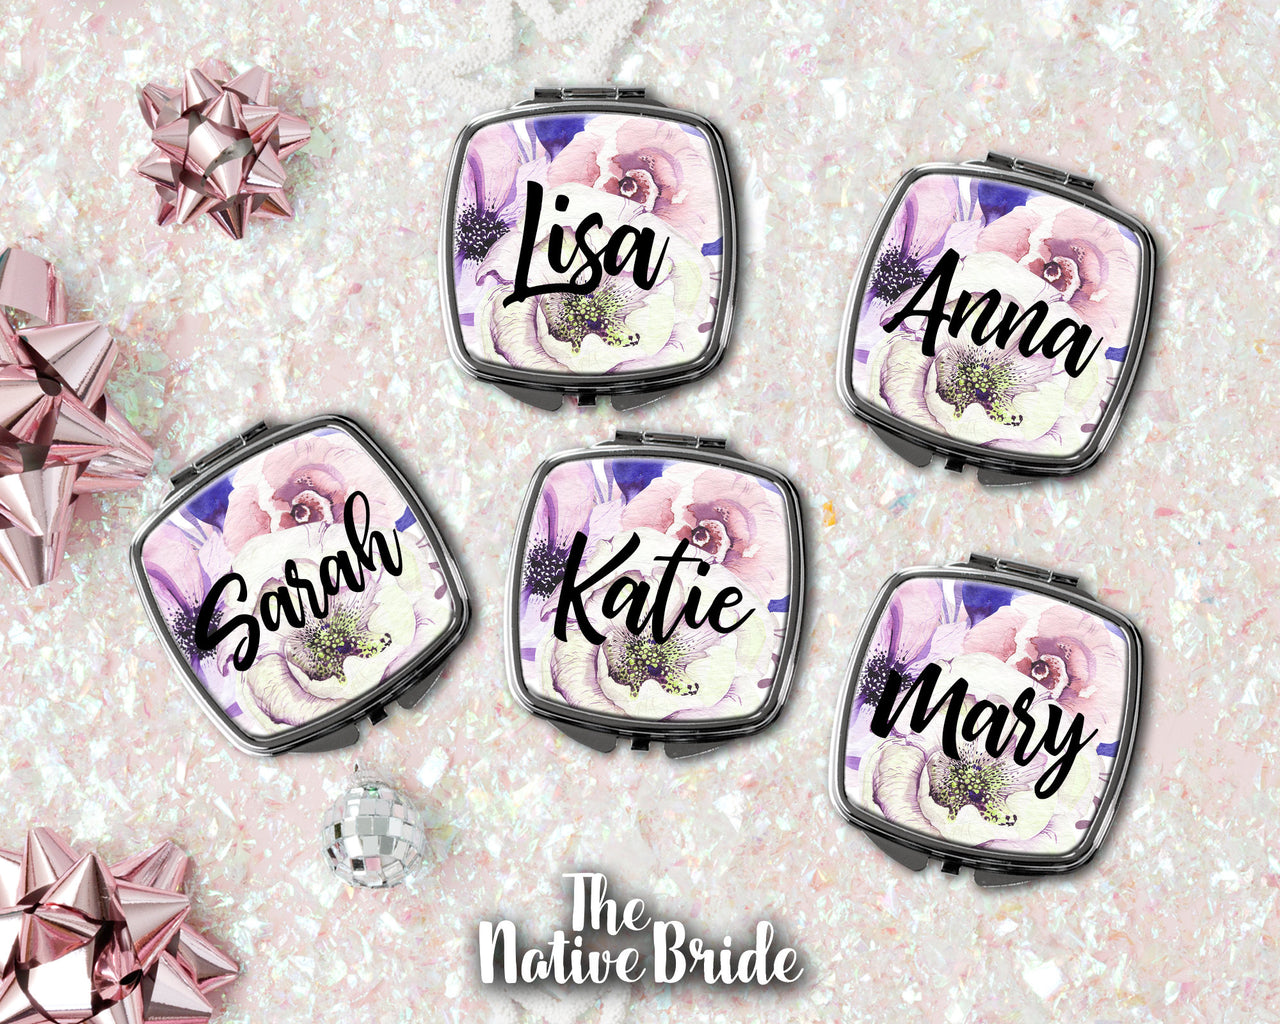 Set of 6 7 8 9 10 Personalized Boho Bridesmaid Gift compact mirrors Bridal shower favors teal purple floral feather cute girly -SCM2SUB